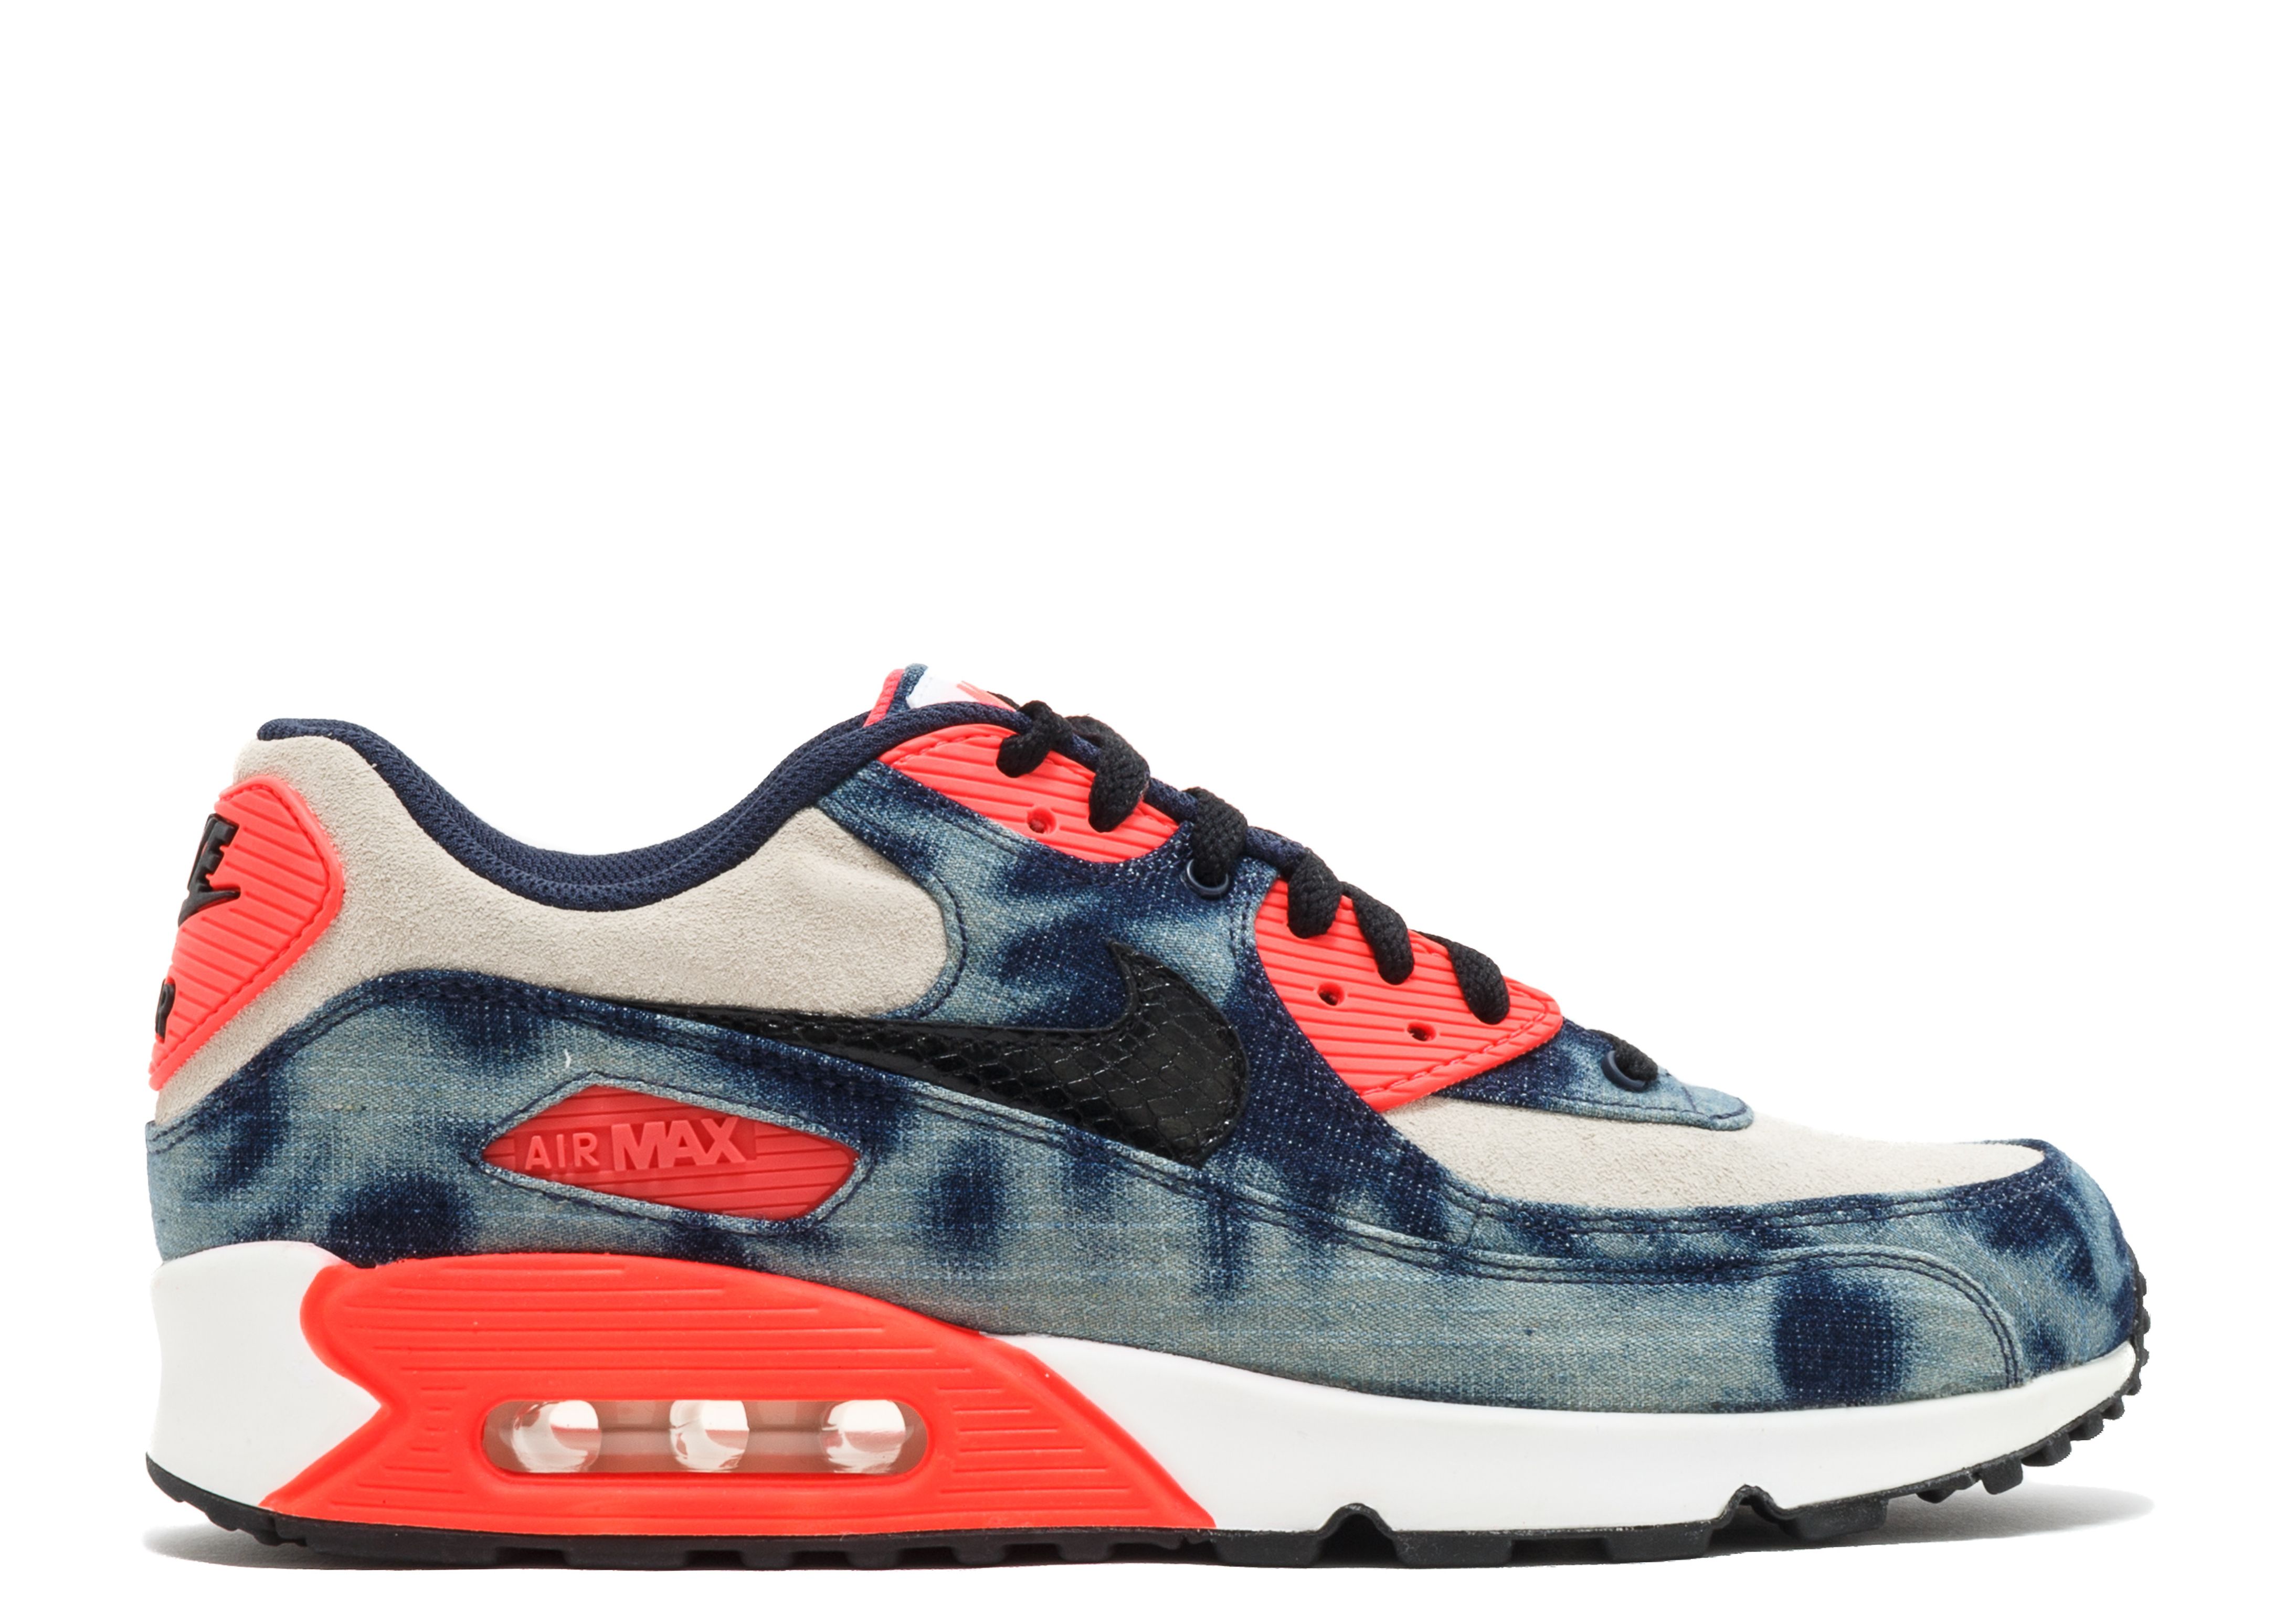 Buy Online nike air max 90 infrared 